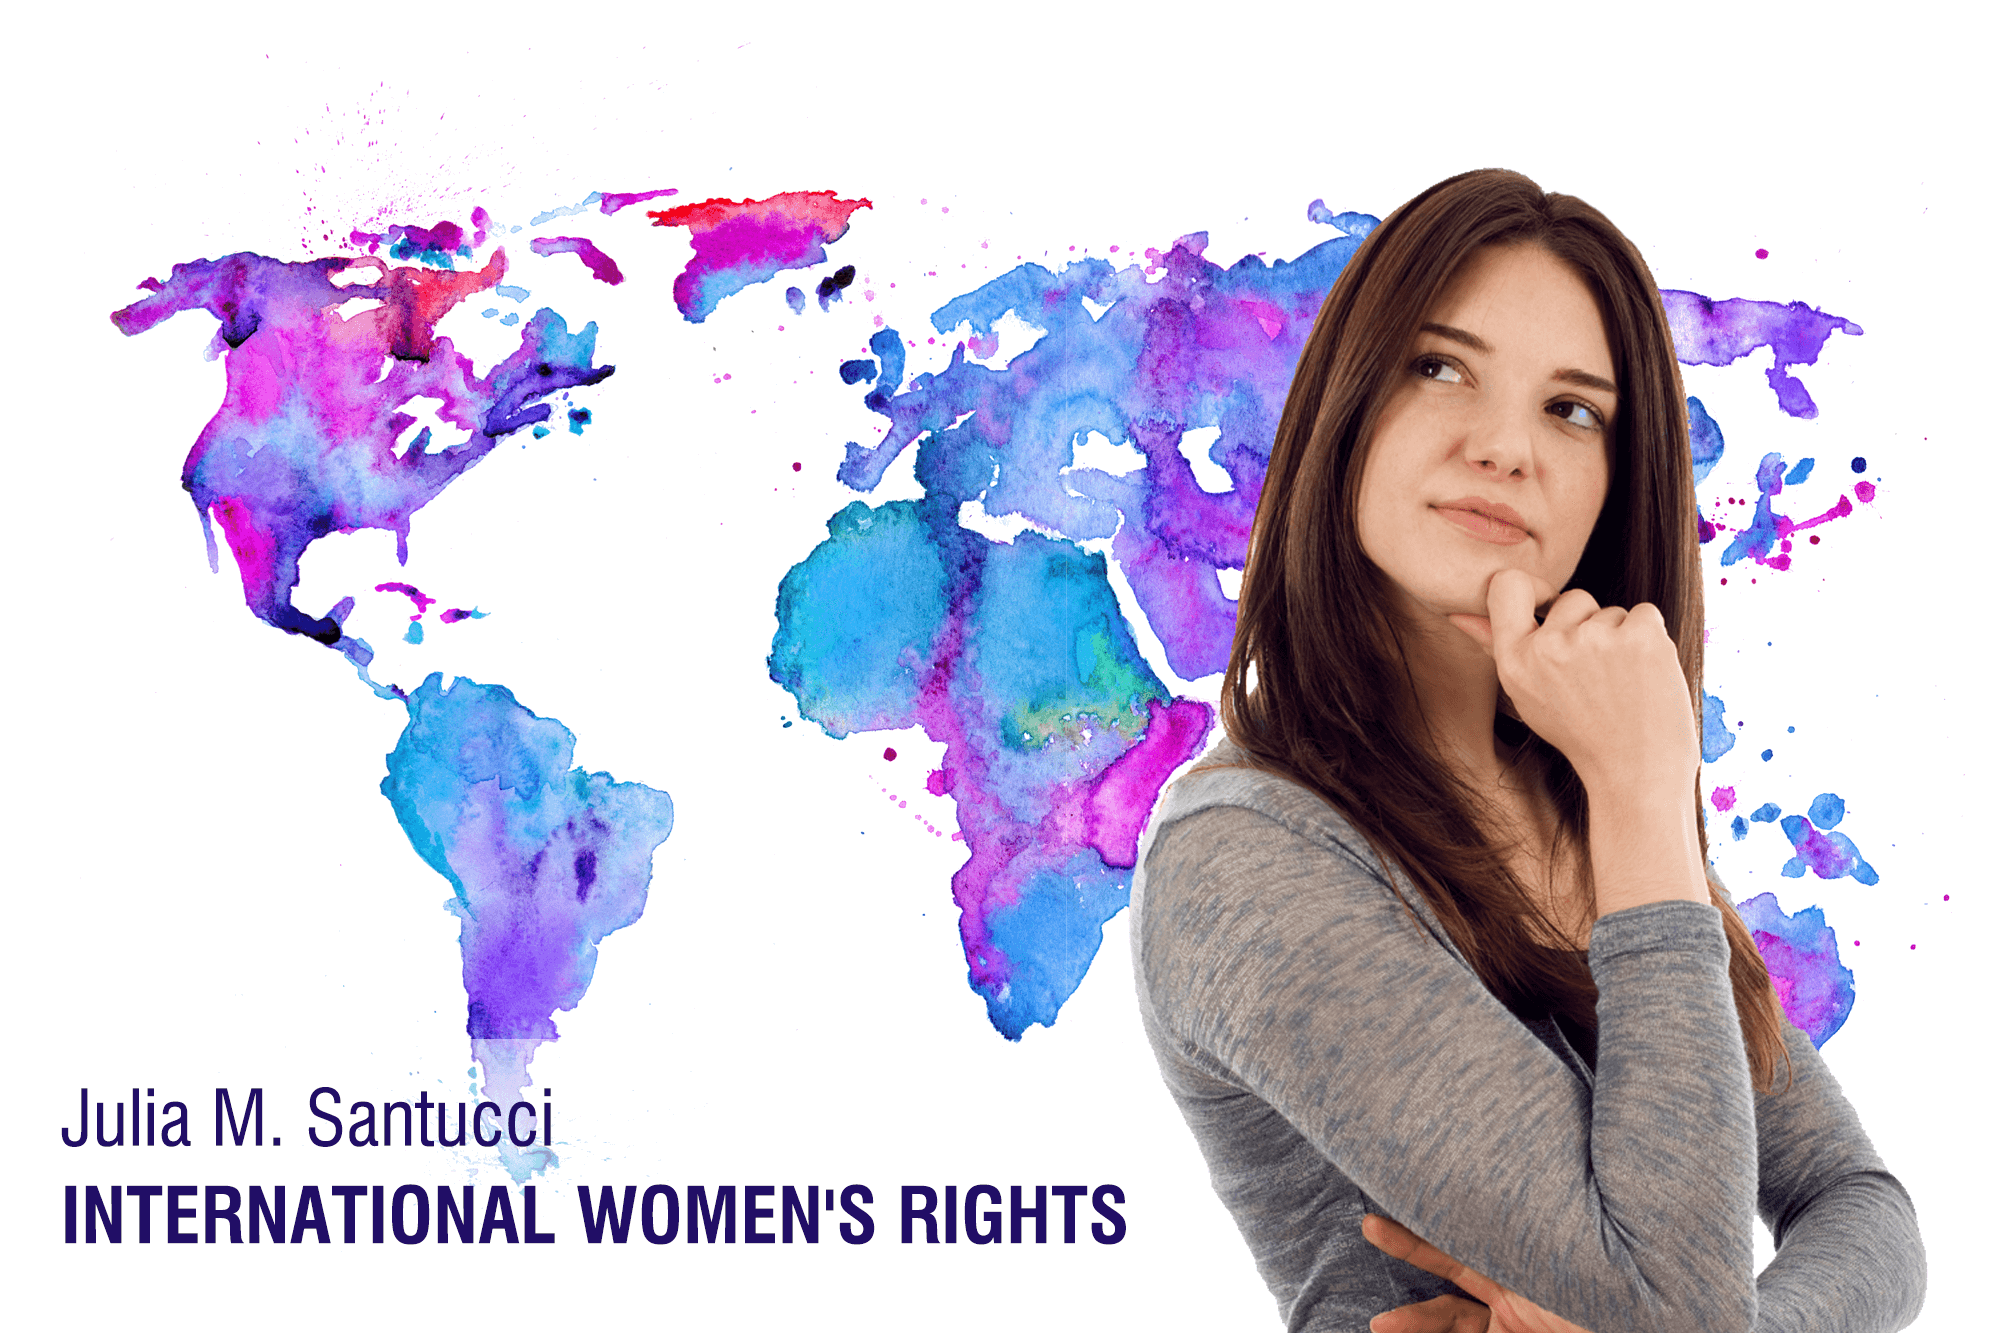 Photograph of a young woman with a world map in the background and the words "Julia M. Santucci International Women's Rights."